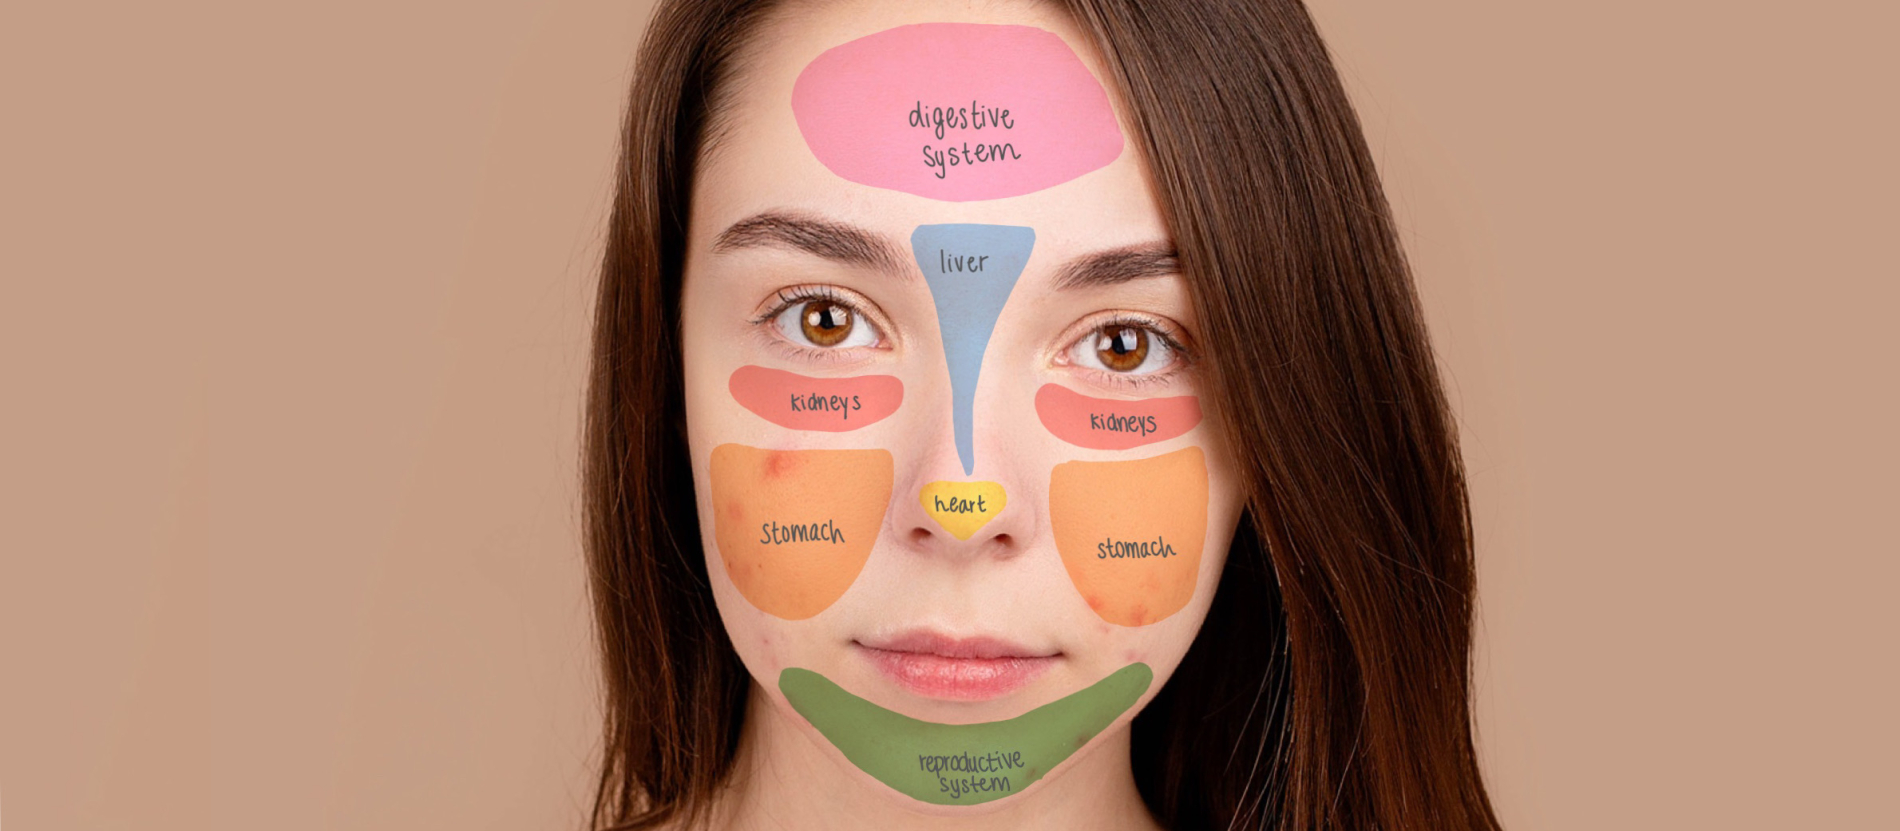 Are Acne Face Maps a Help or a Hoax? - McGill University